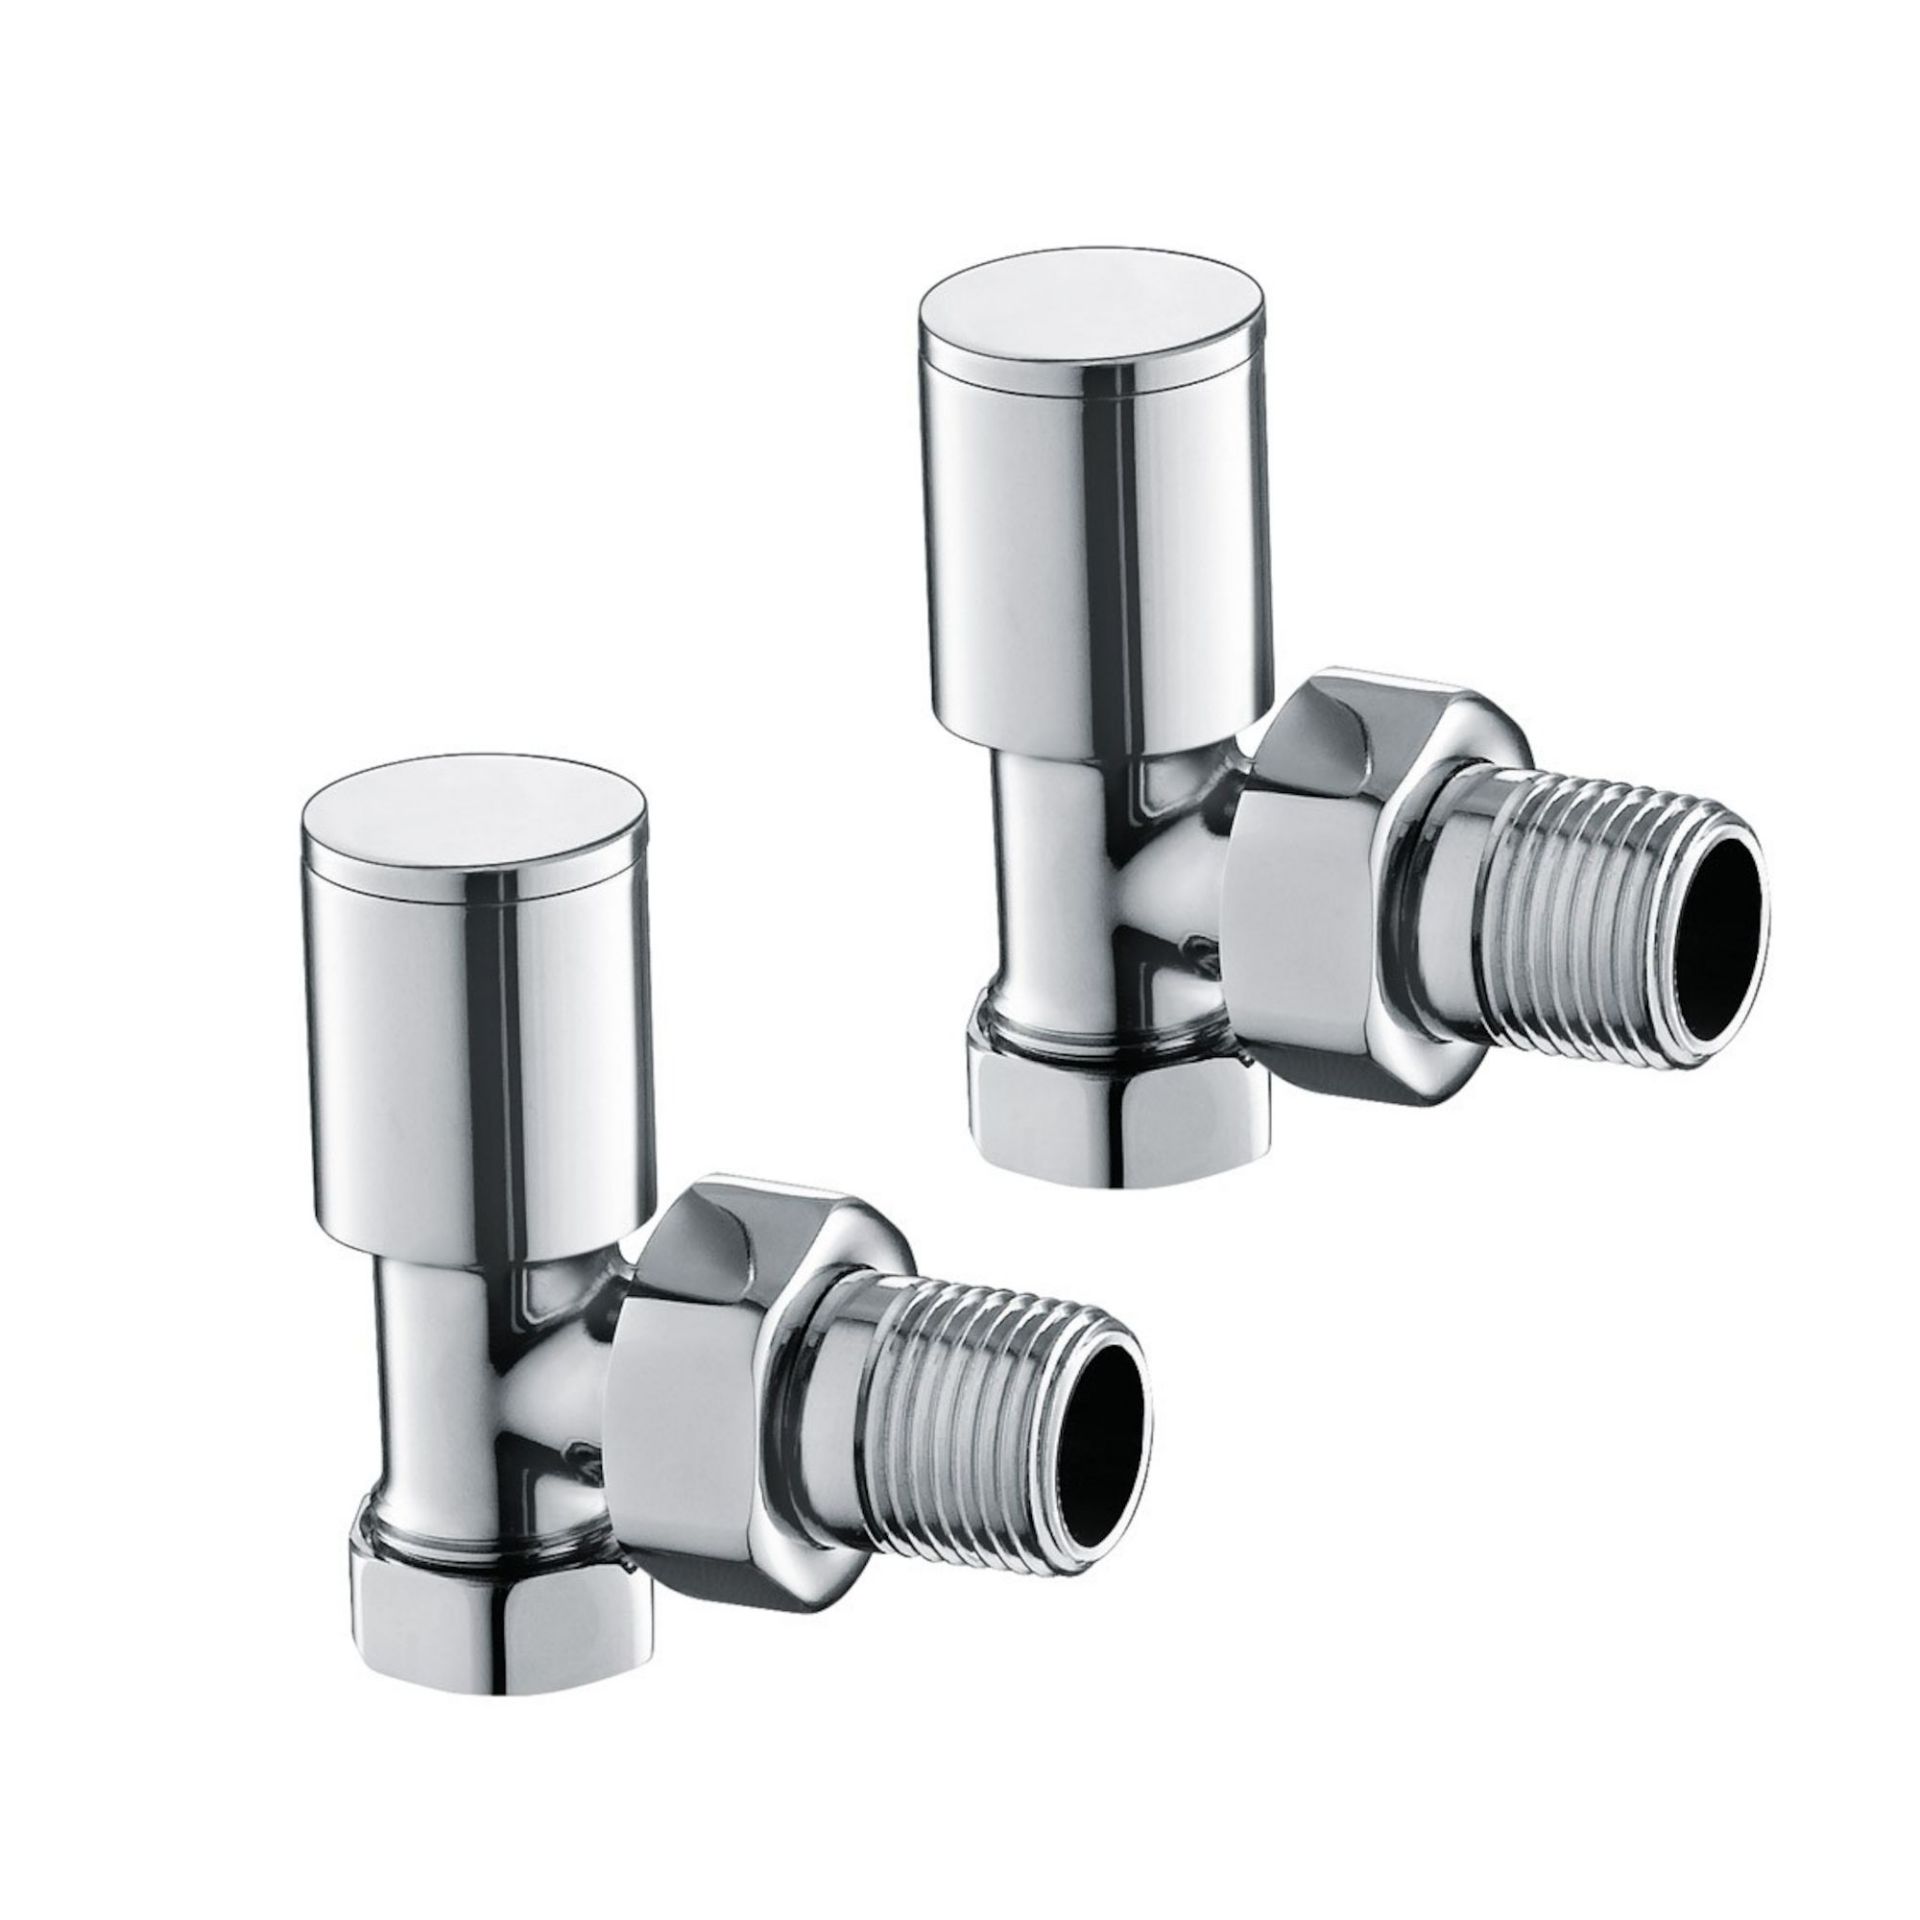 (RK1023) 15mm Standard Connection Angled Radiator Valves - Heavy Duty Polished Chrome Plated Br... - Image 2 of 3